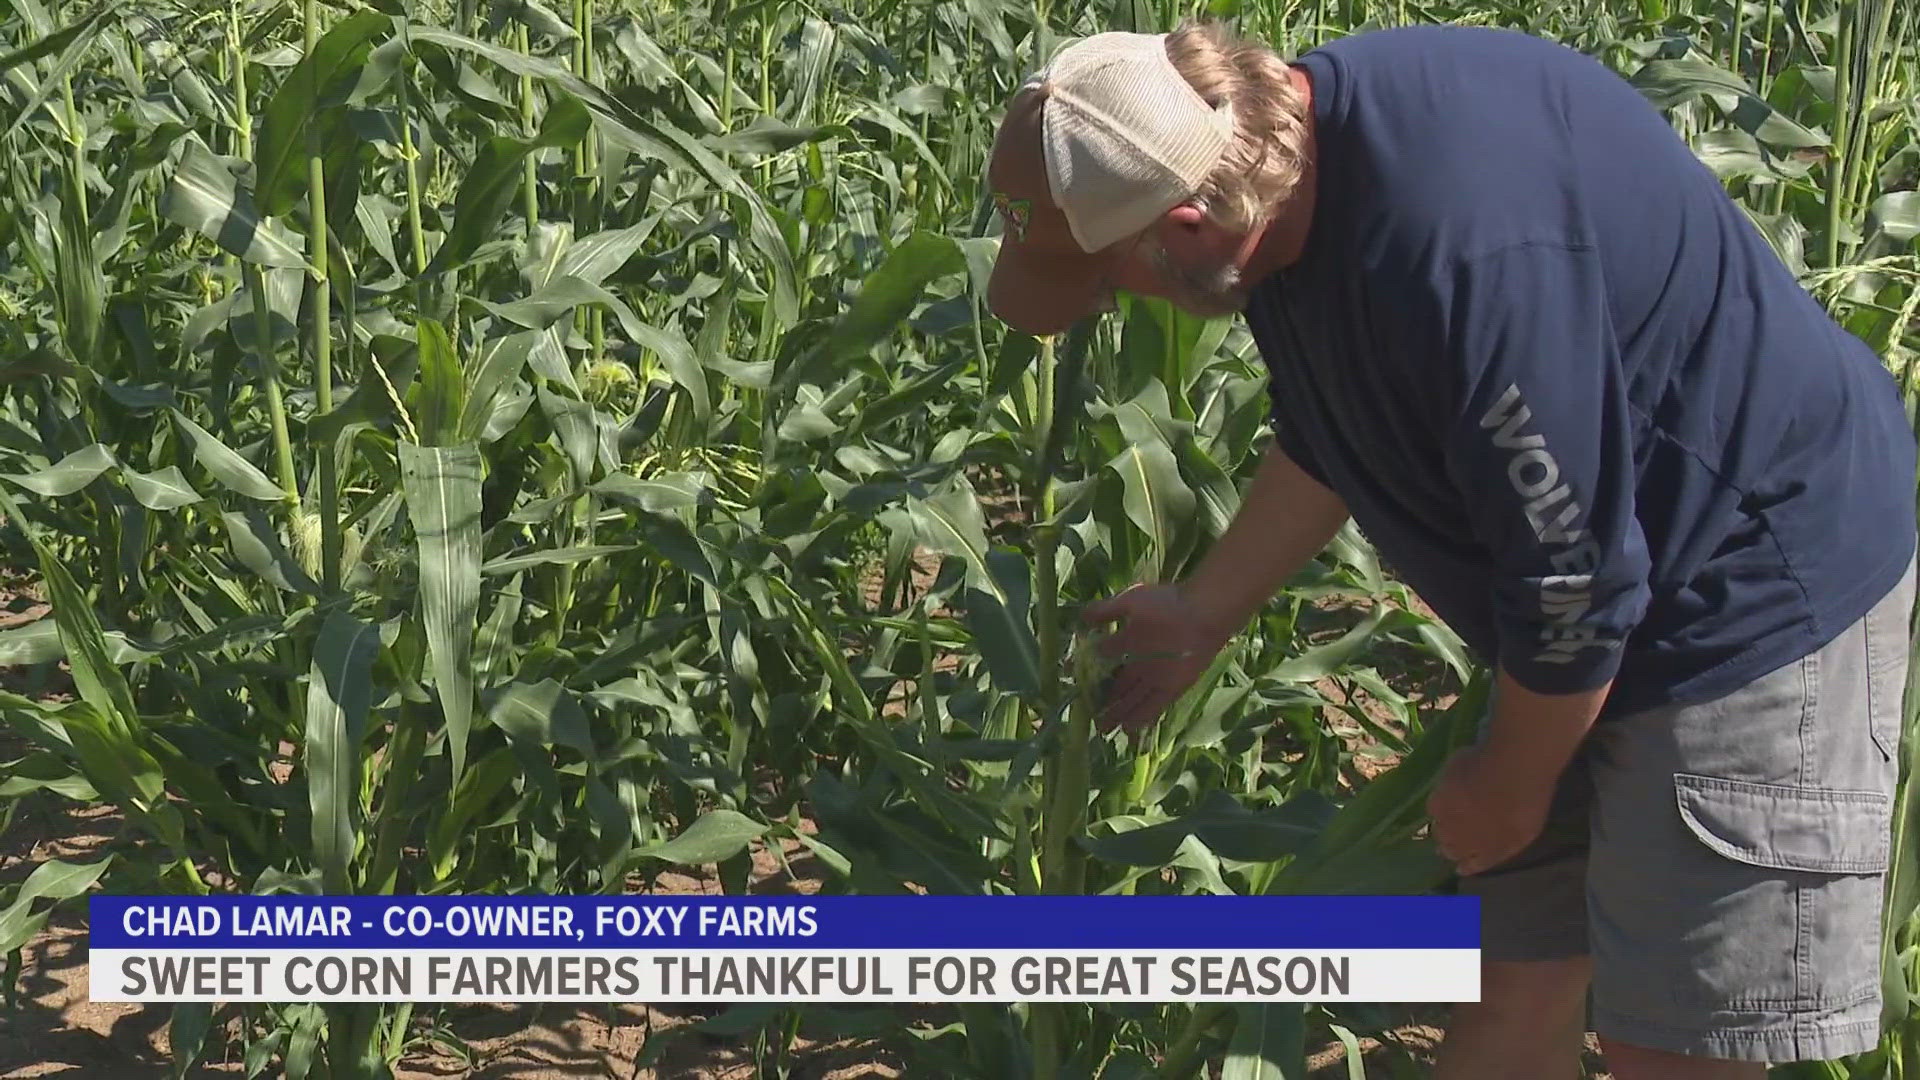 The owners of a West Michigan farm are happy to have a successful sweet corn season this year.